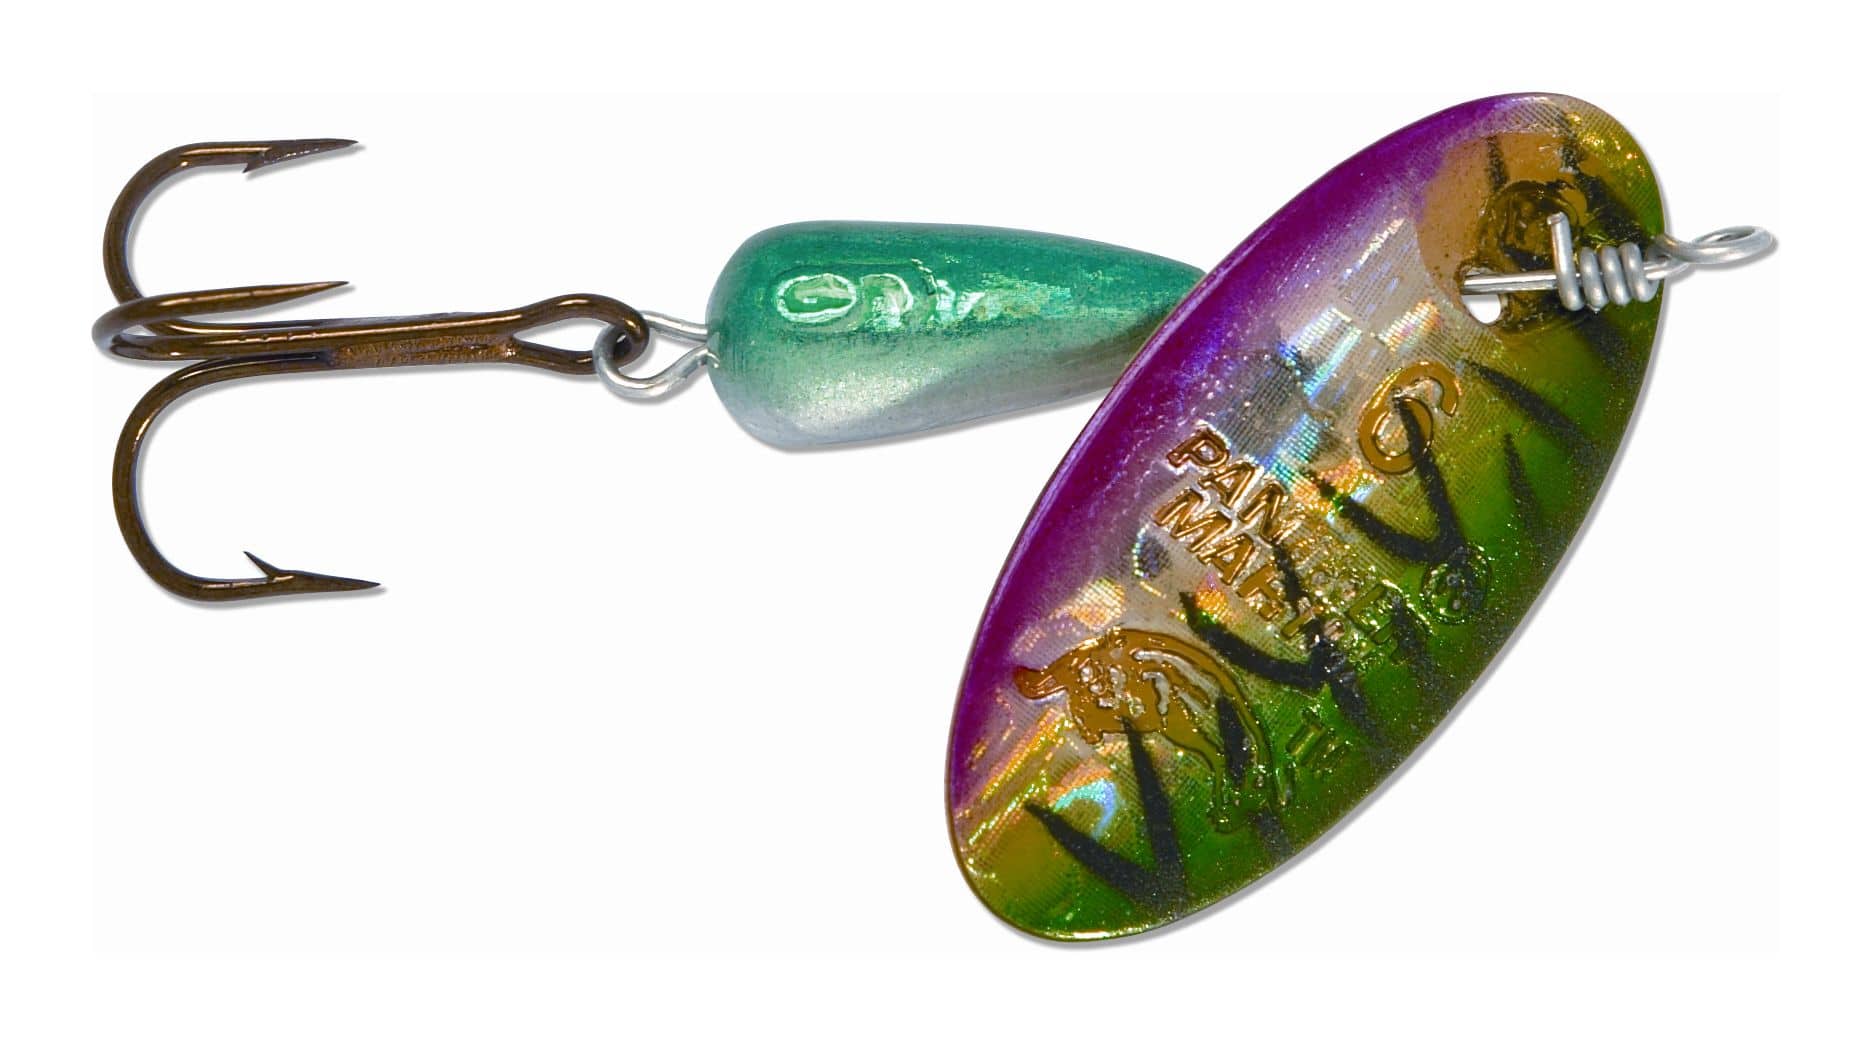 Panther Martin Holograph Series Spinner, Treble Hook #9, Tiger